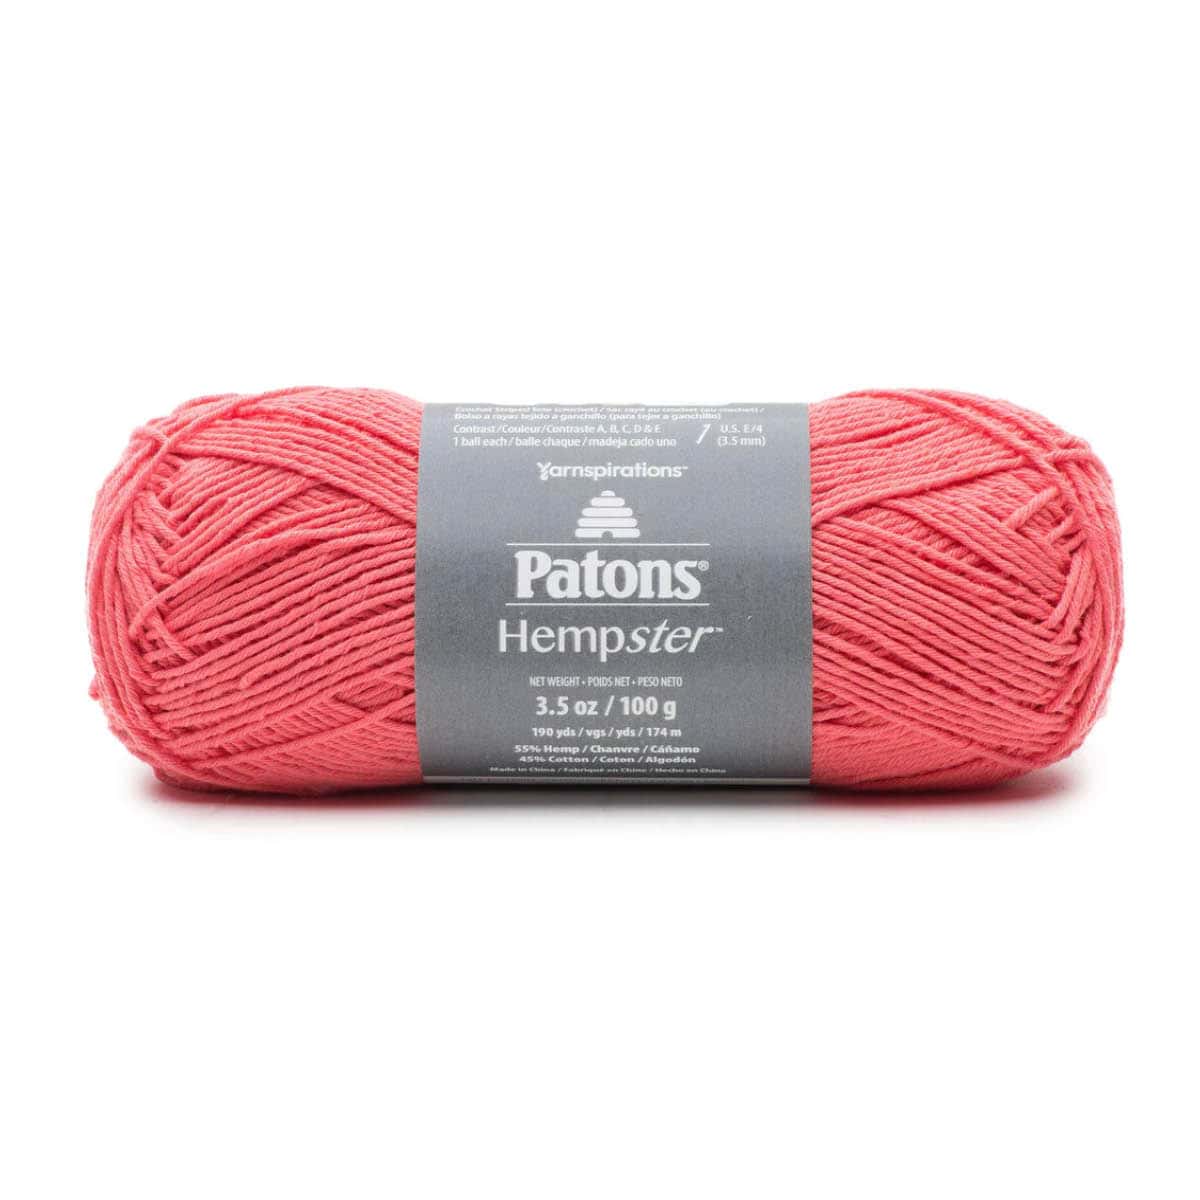 My hemp yarn game has been ruined! Discontinued yarn is the worst, so let's  make the best of it! Patons Hempster is so amazing: durable